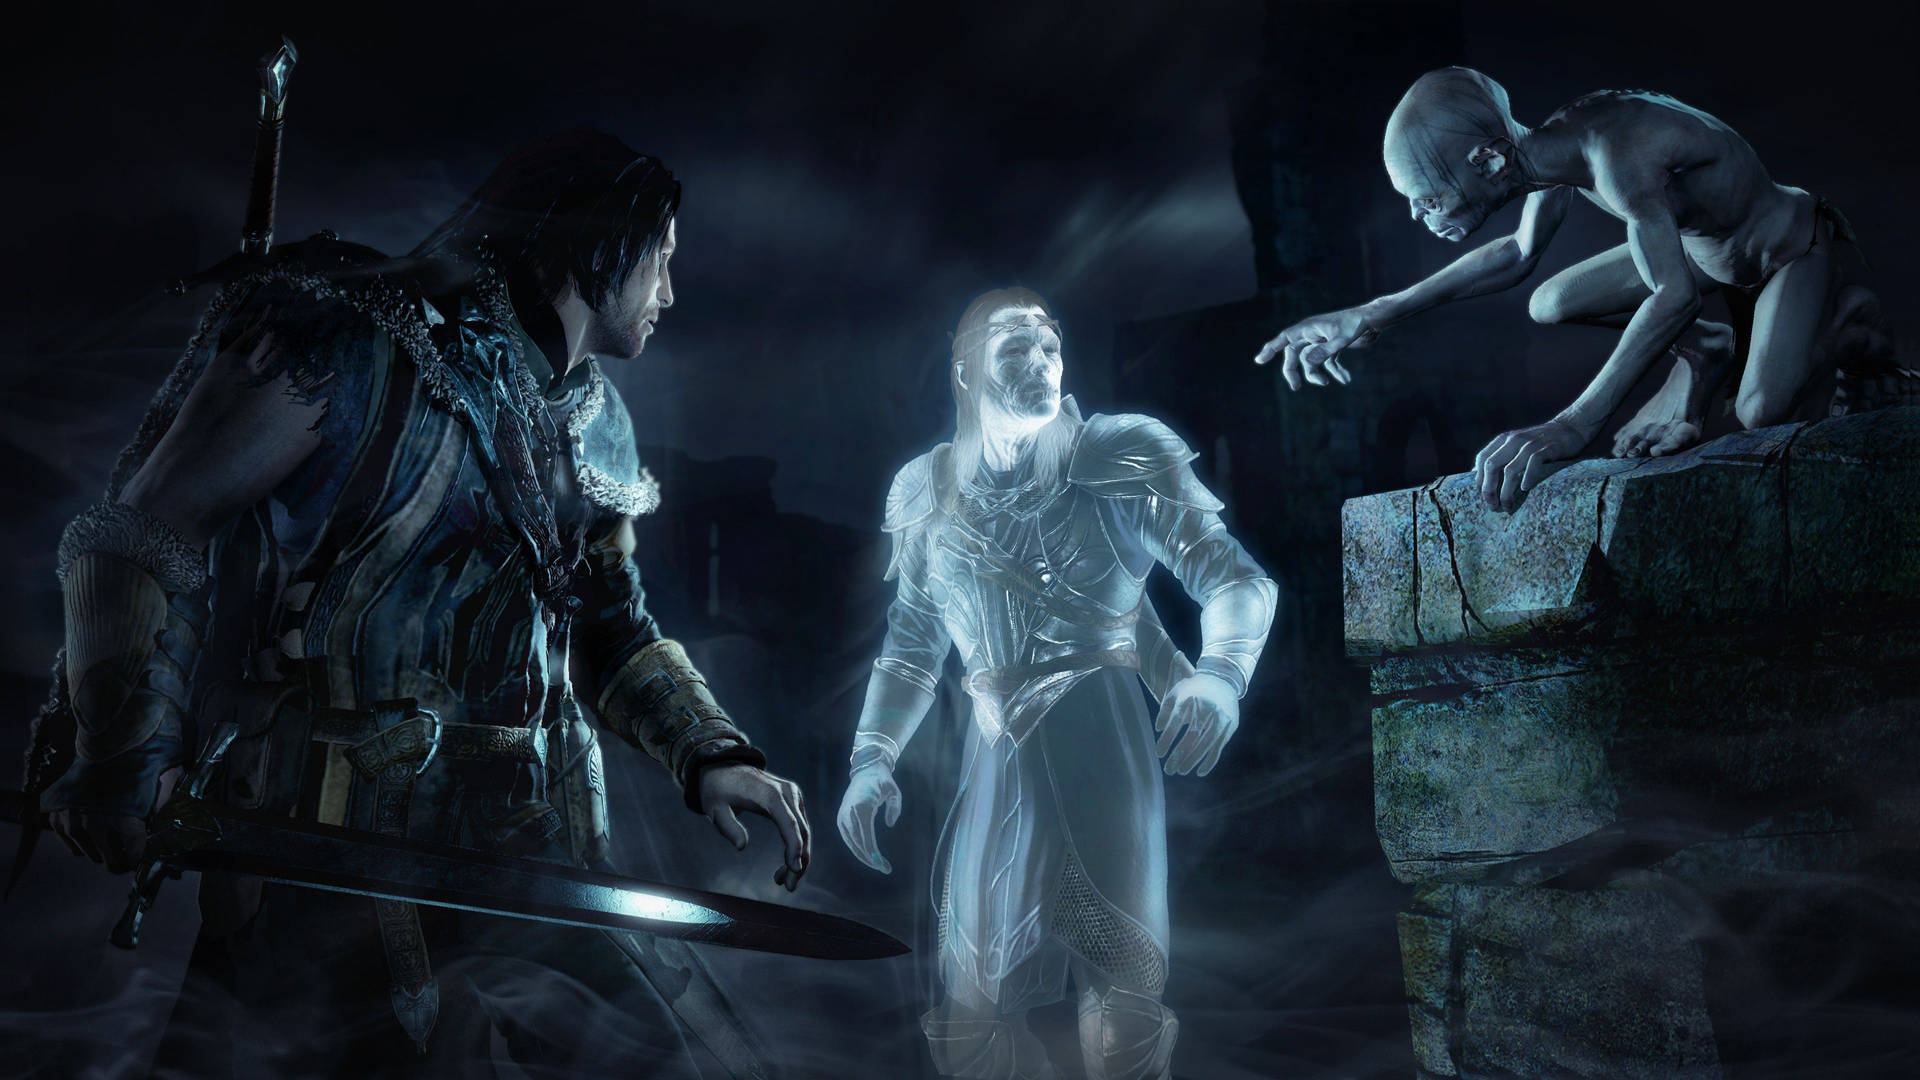 Download Wraith And Gollum Shadow Of Mordor 4k Wallpaper 